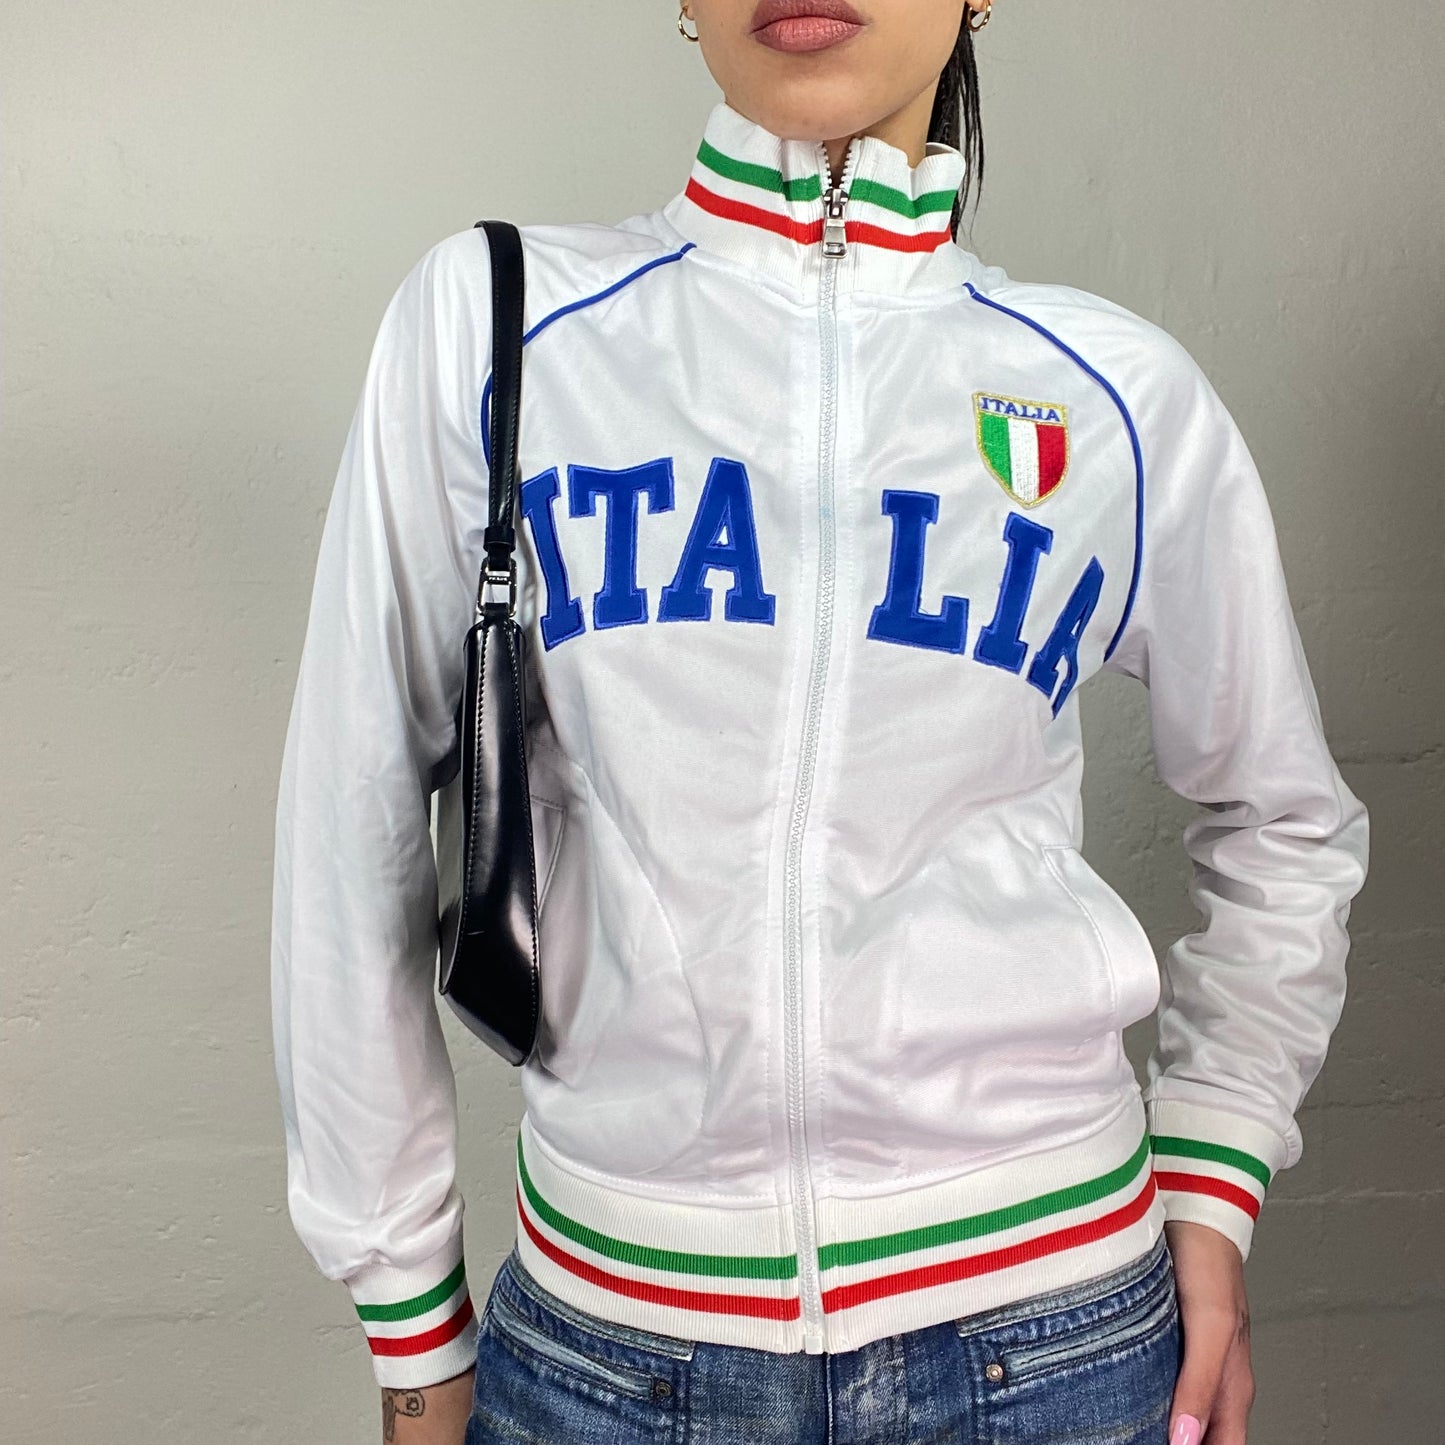 Vintage 2000's Italia Sporty White Zip Up Jacket with Flag Highneck Detail (S/M)